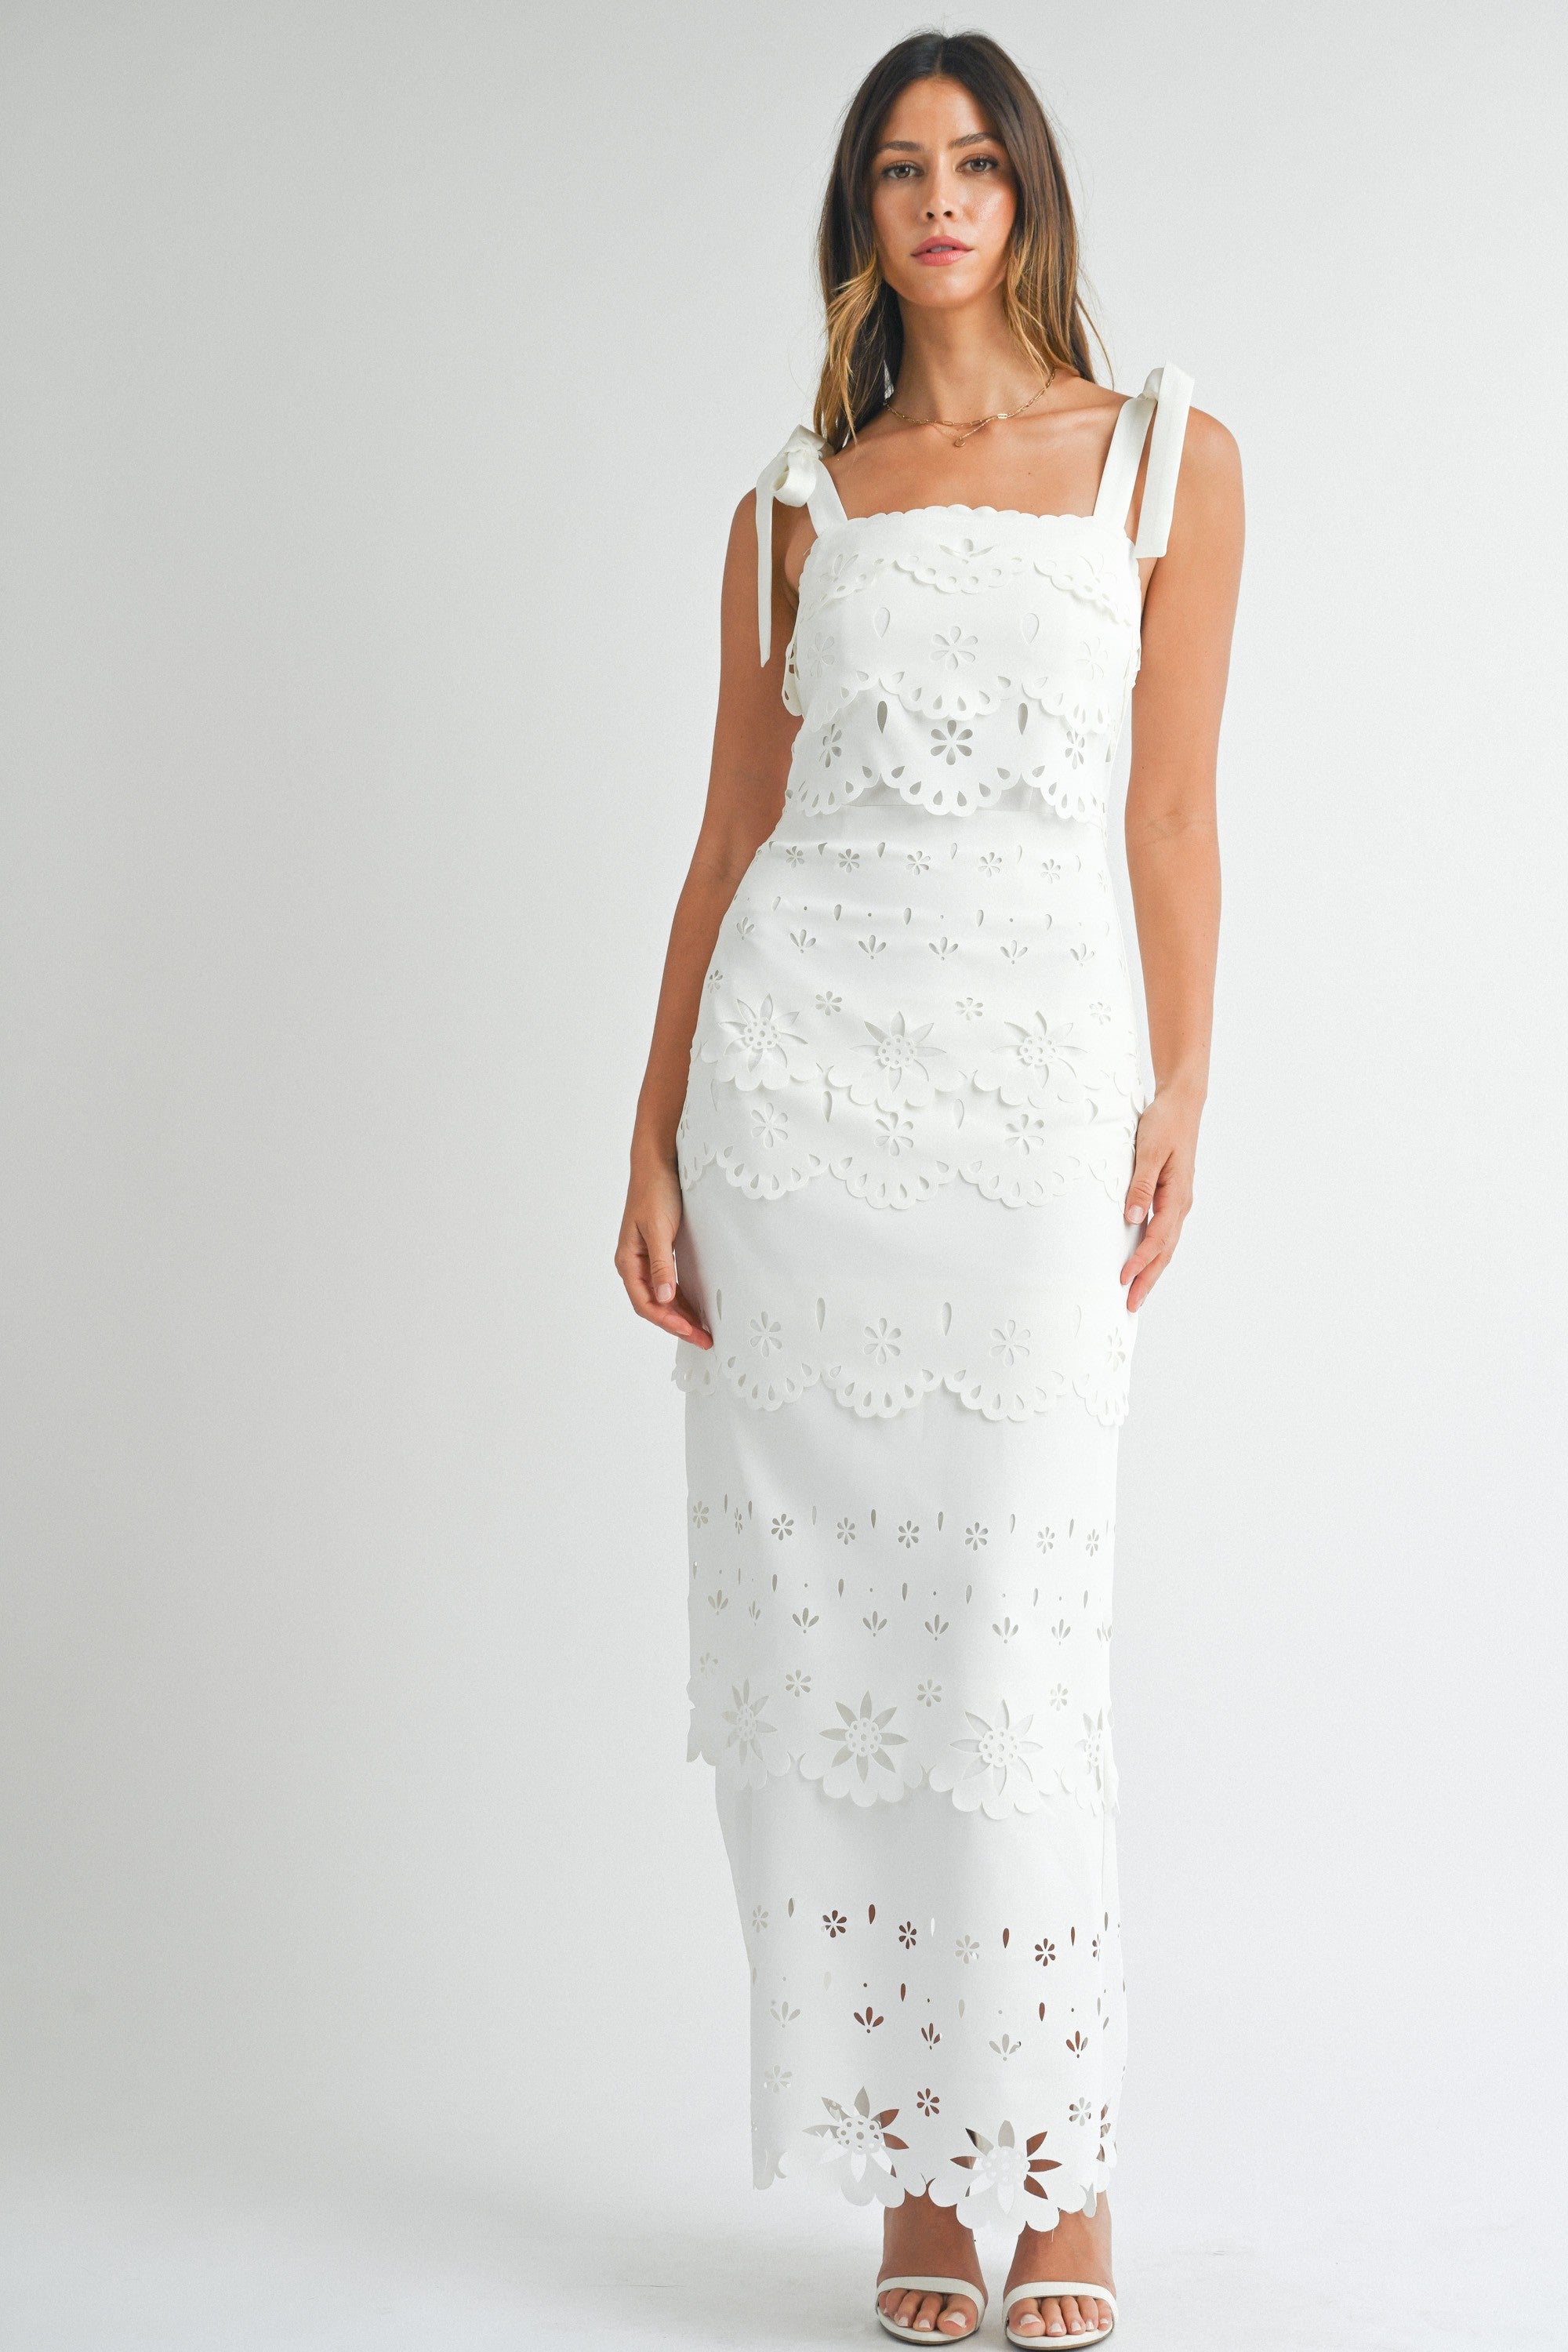 Scallop Laser Cut Maxi Dress with Shoulder Strap | Collective Request 